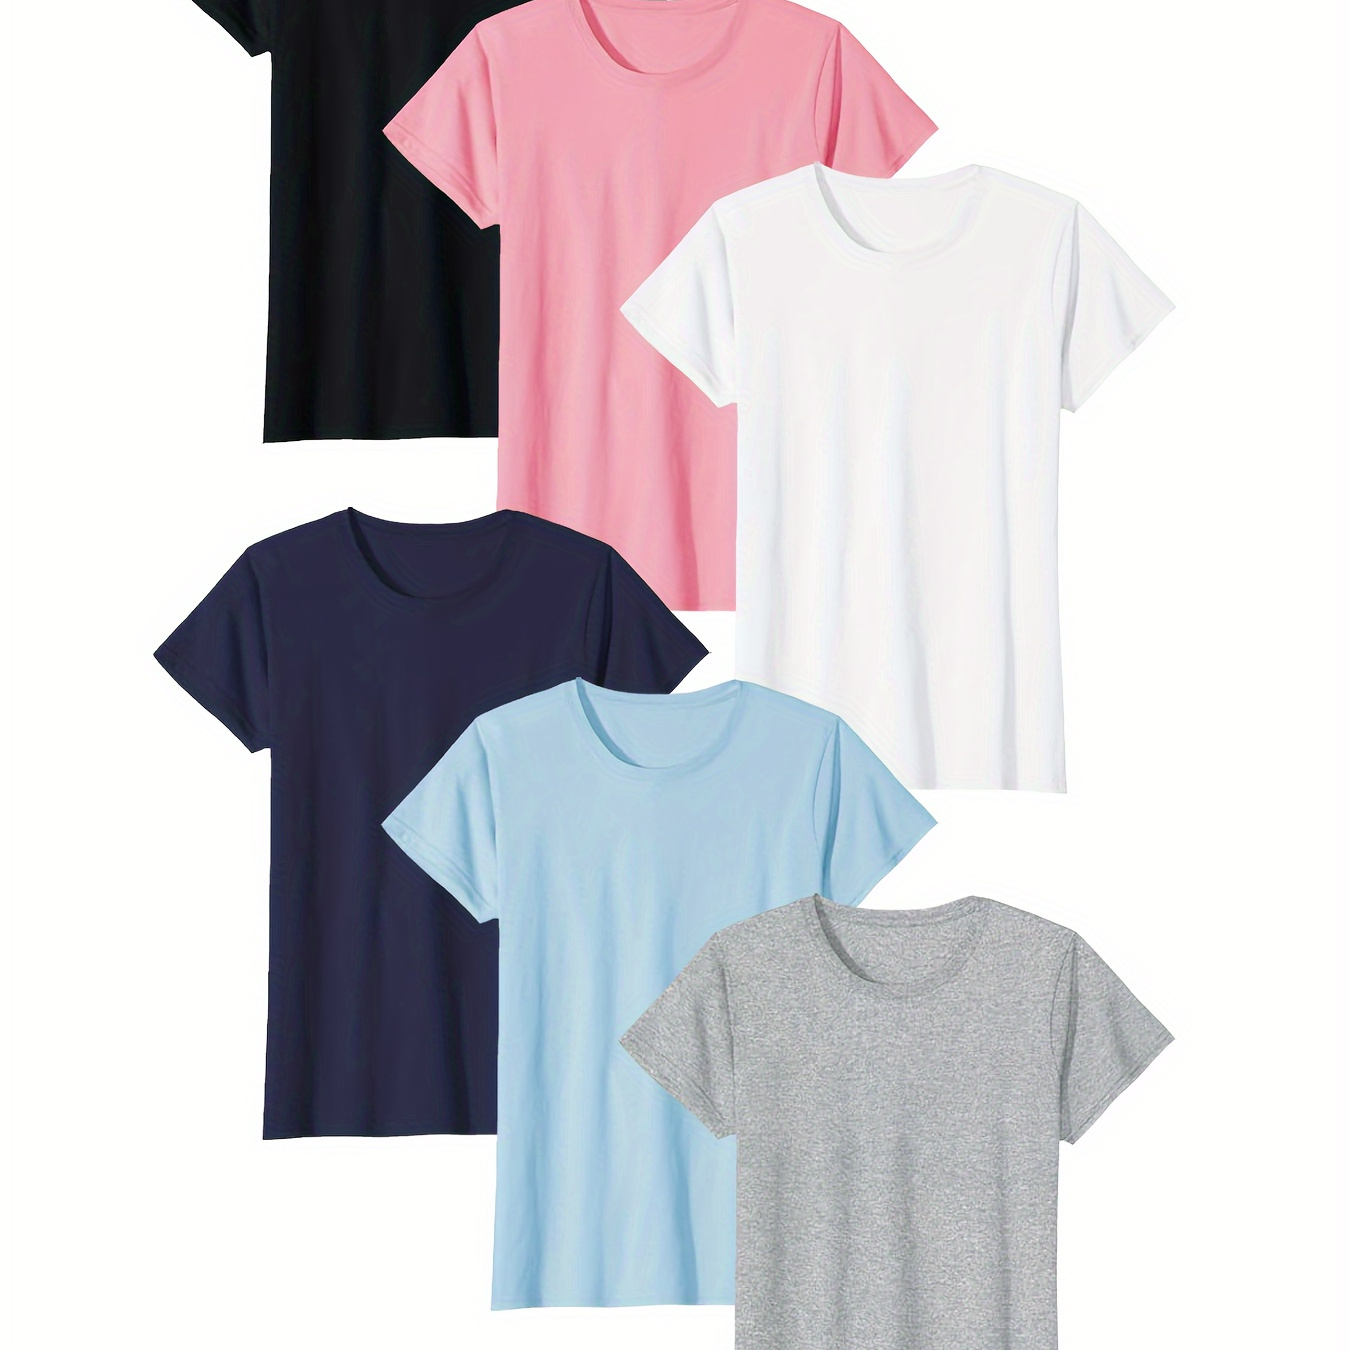 

Solid Color Crew Neck T-shirt 6 Packs, Casual Short Sleeve Casual Top For Spring & Summer, Women's Clothing